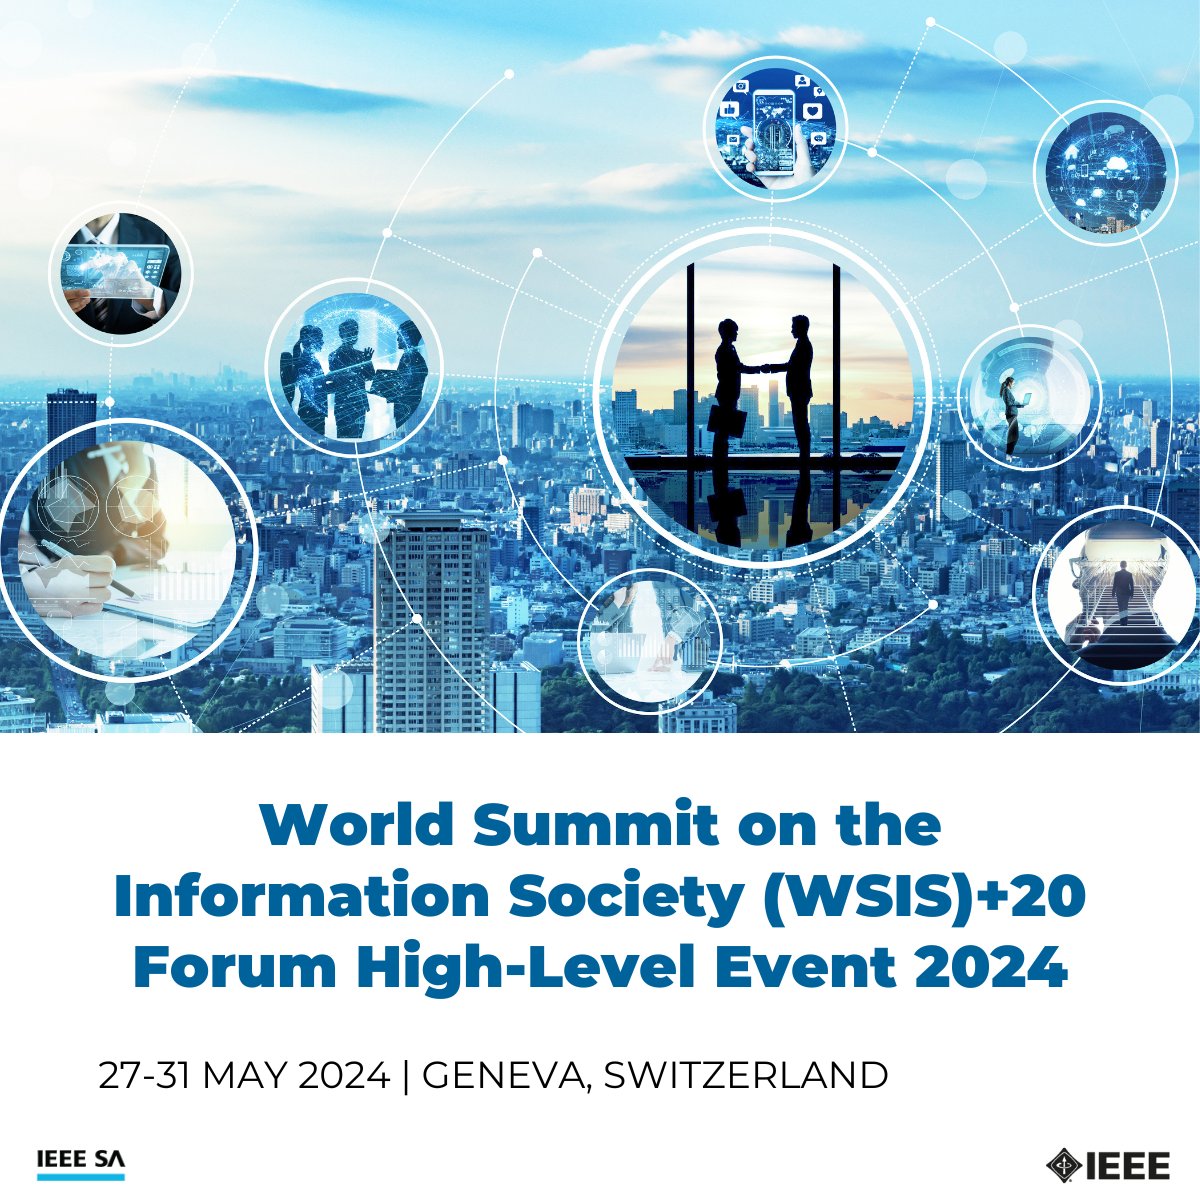 Learn more about how IEEE will contribute to building a standards-based, sustainable, and equitable world during the WSIS+20 Forum High-Level Event 2024 here: ieeesa.io/3QHAHD1